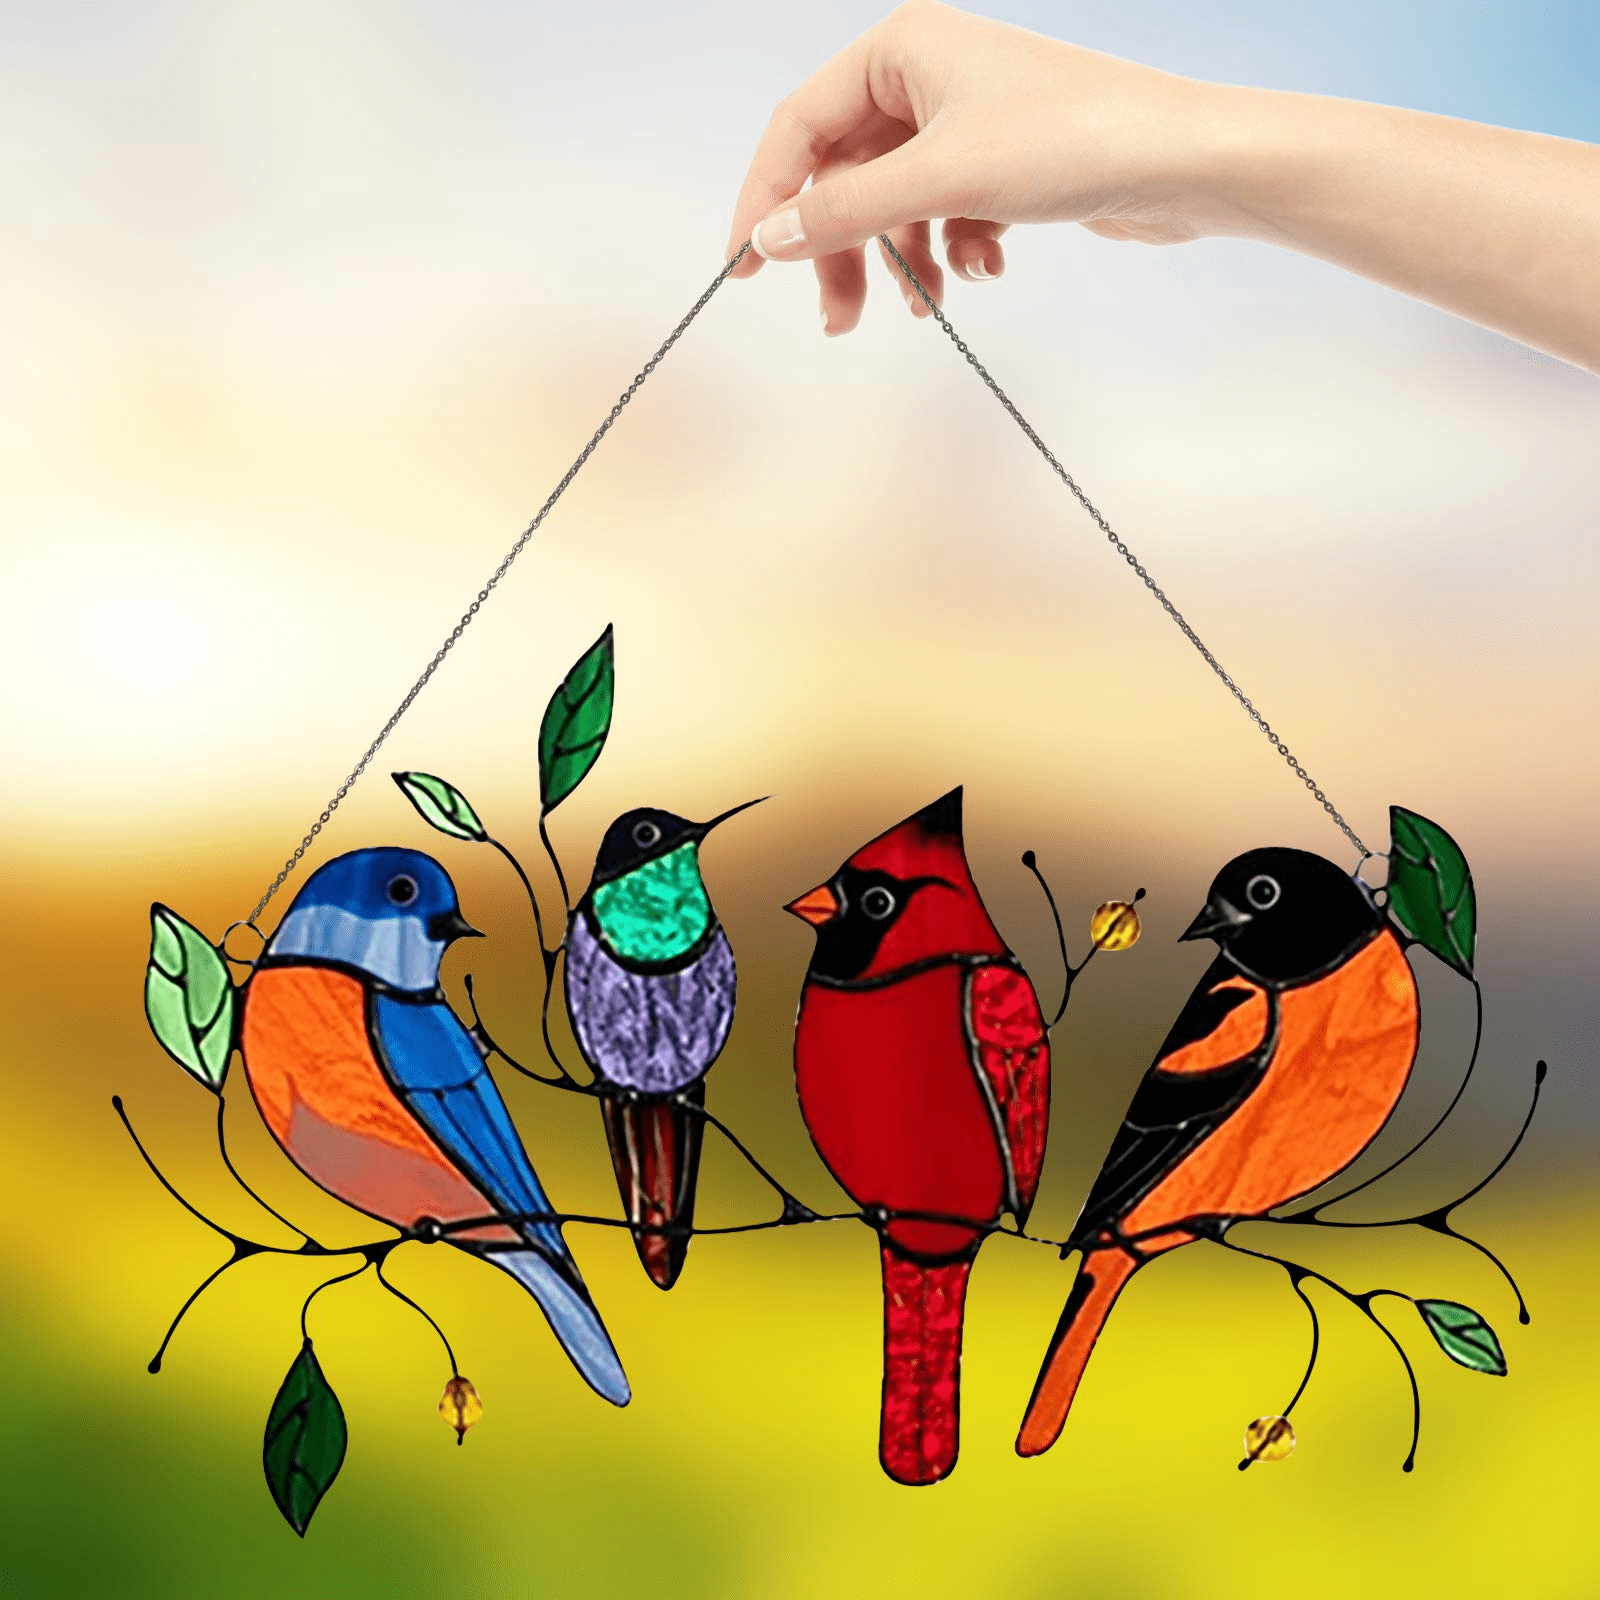 Acrylic Bird Series Catcher Ornaments Hanging Suncacthers for Wall Door Yard Tree Home YUNINI Stained Suncatcher Panels-4 Colorful Art Birds on a Wire for Window Hangings A-4 Birds 